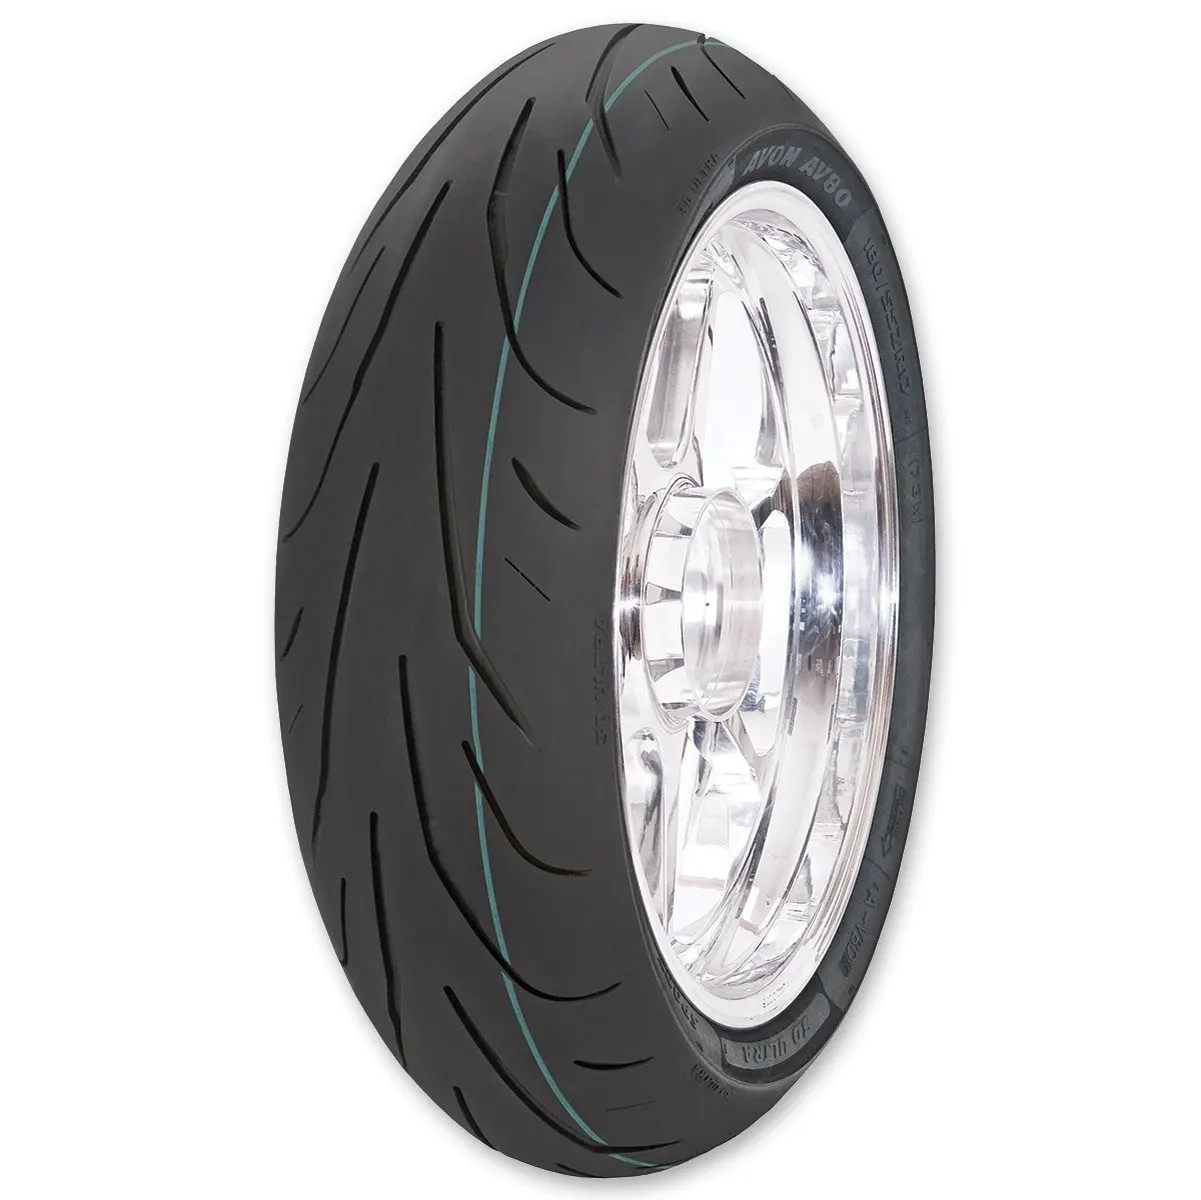 Cheap Avon Motorcycle Tires, find Avon Motorcycle Tires deals on line